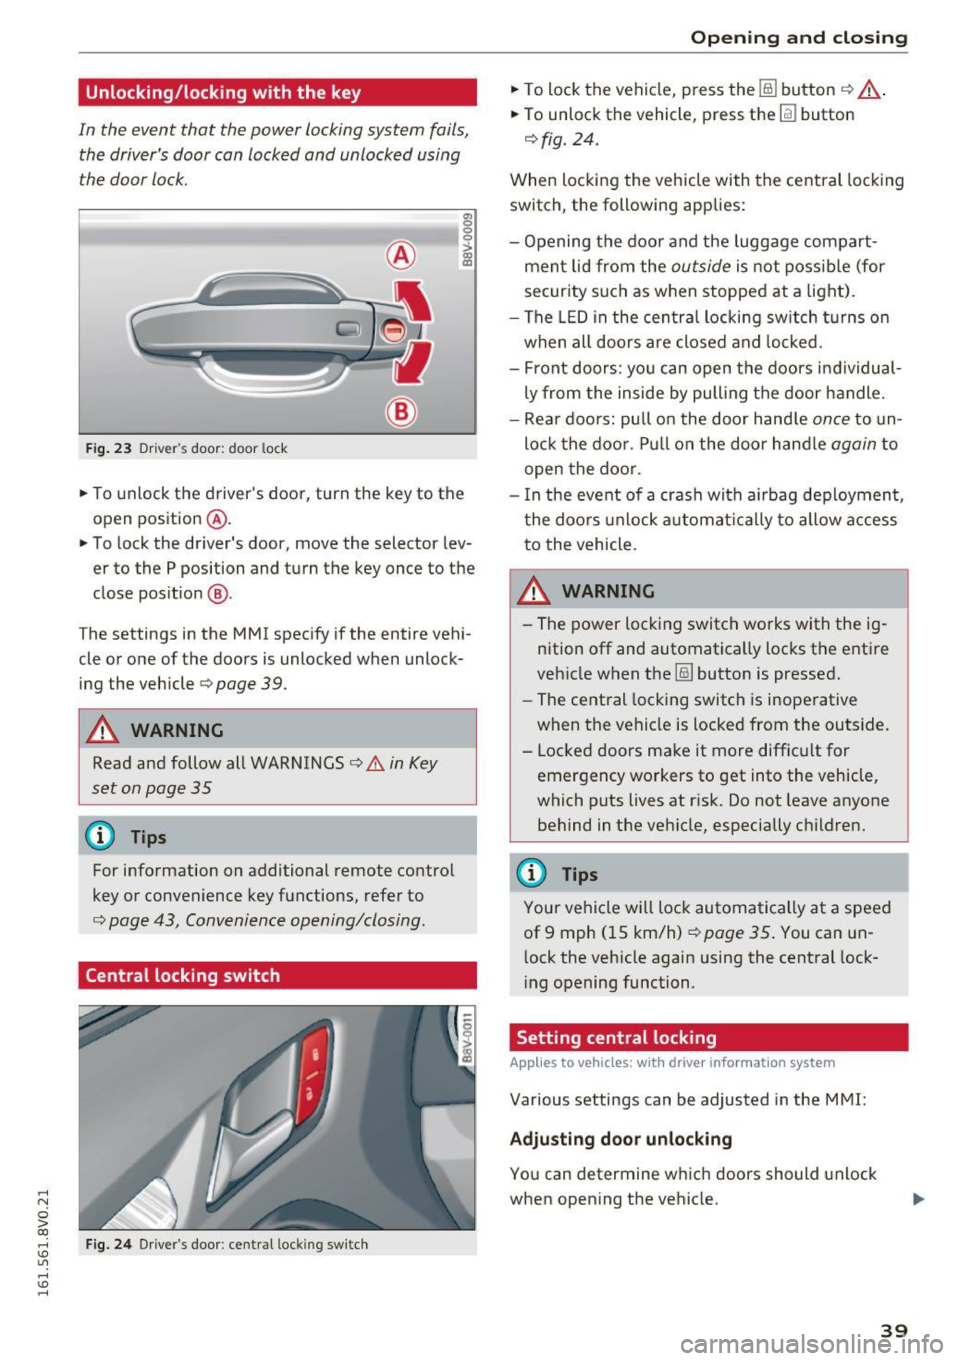 AUDI S3 2016  Owners Manual .... N 
0 > CX) 
.... I.Cl U"I 
.... I.Cl .... 
Unlocking/locking w ith  the  key 
In  the  event  that  the  power  locking  system  fails, 
the  drivers  door  can  locked  and  unlocked  using 
th